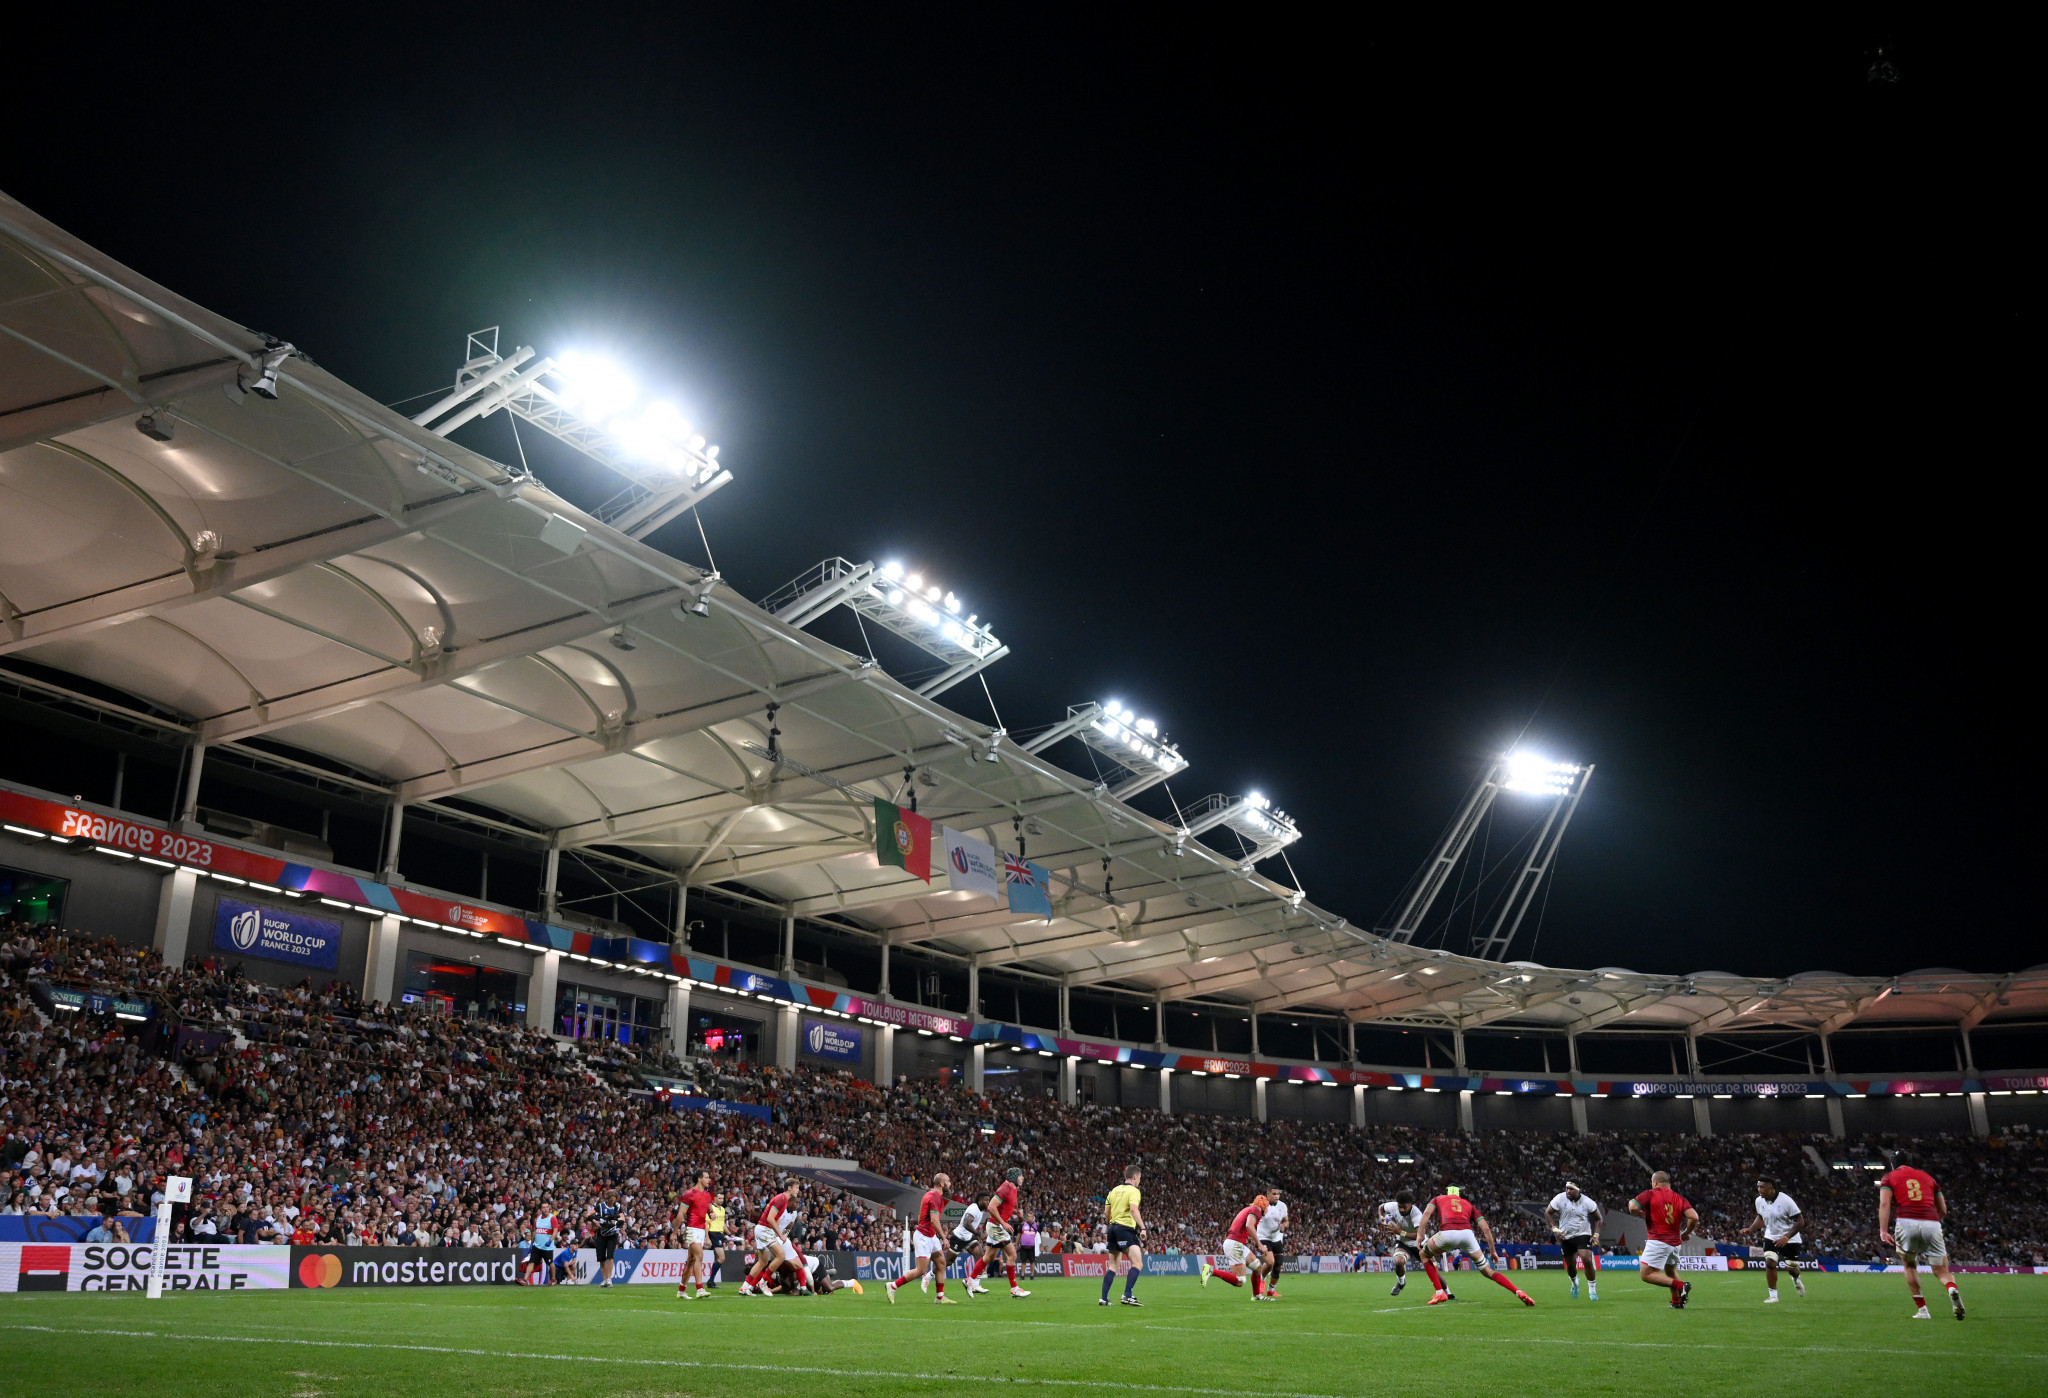 The Stadium de Toulouse was the venue for the final match of the pool phase, one of its most dramatic as Portugal earned a famous last-gasp win over Fiji ©Getty Images